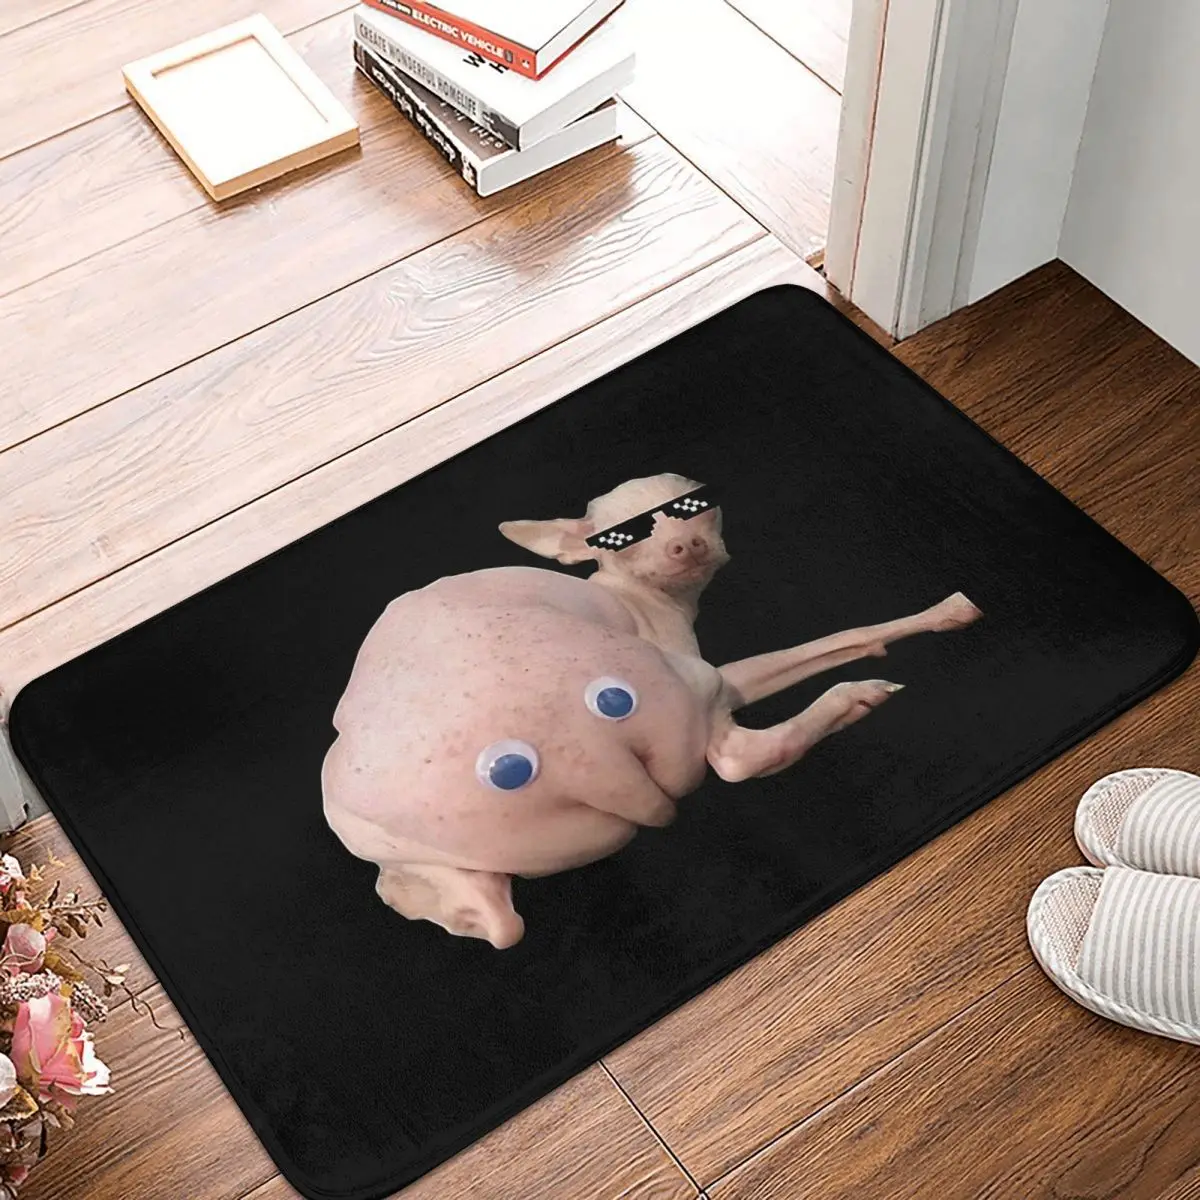 

Hamster Show Off One's Cleverness Bath Non-Slip Carpet Funny Living Room Mat Welcome Doormat Floor Decoration Rug